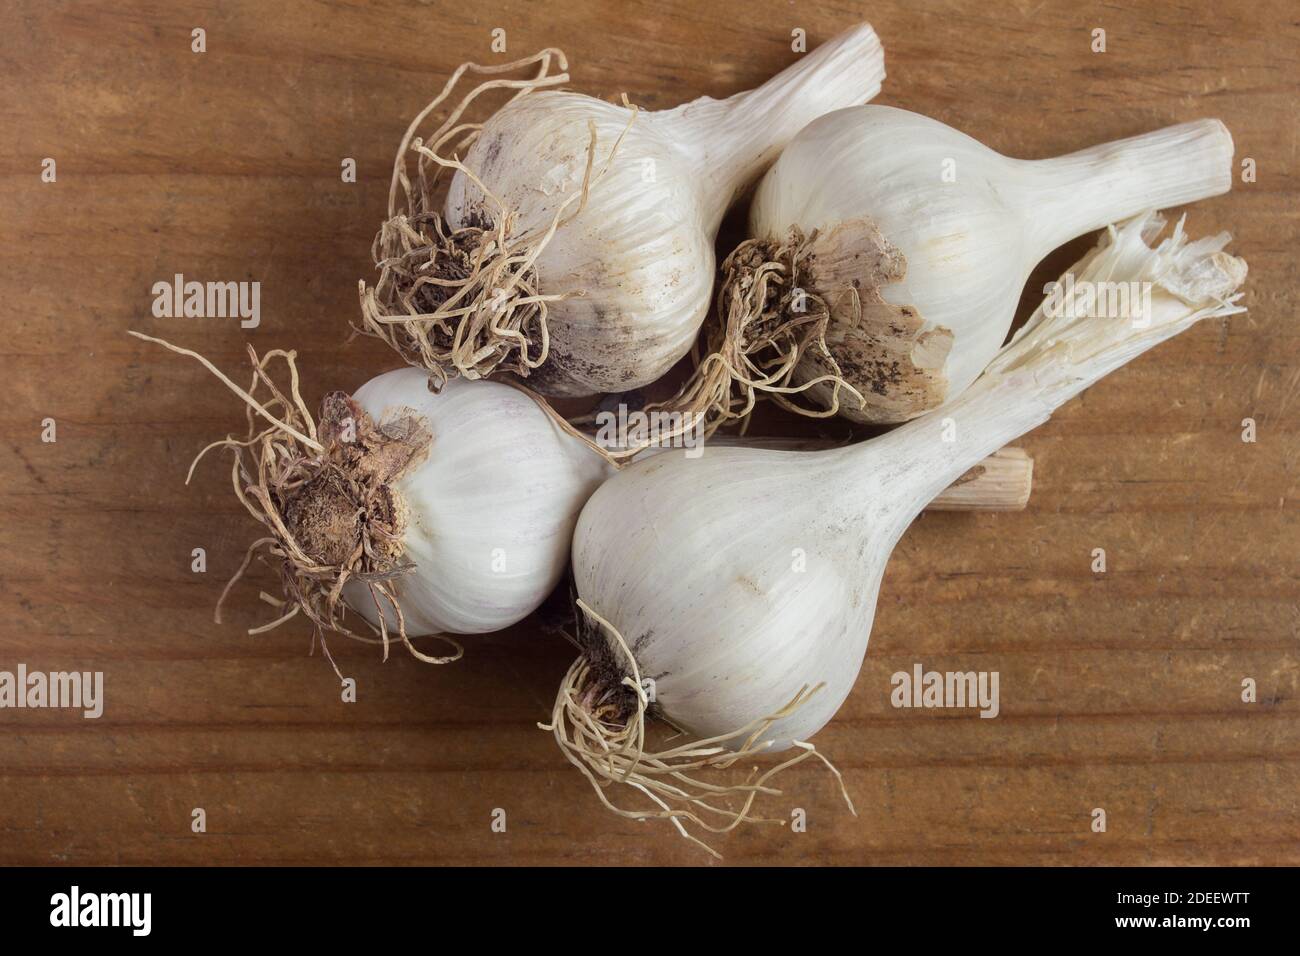 Four small garlic heads from the organic garden on a vintage wooden table. Still life. Healthy food. naturopathic medicine. Stock Photo